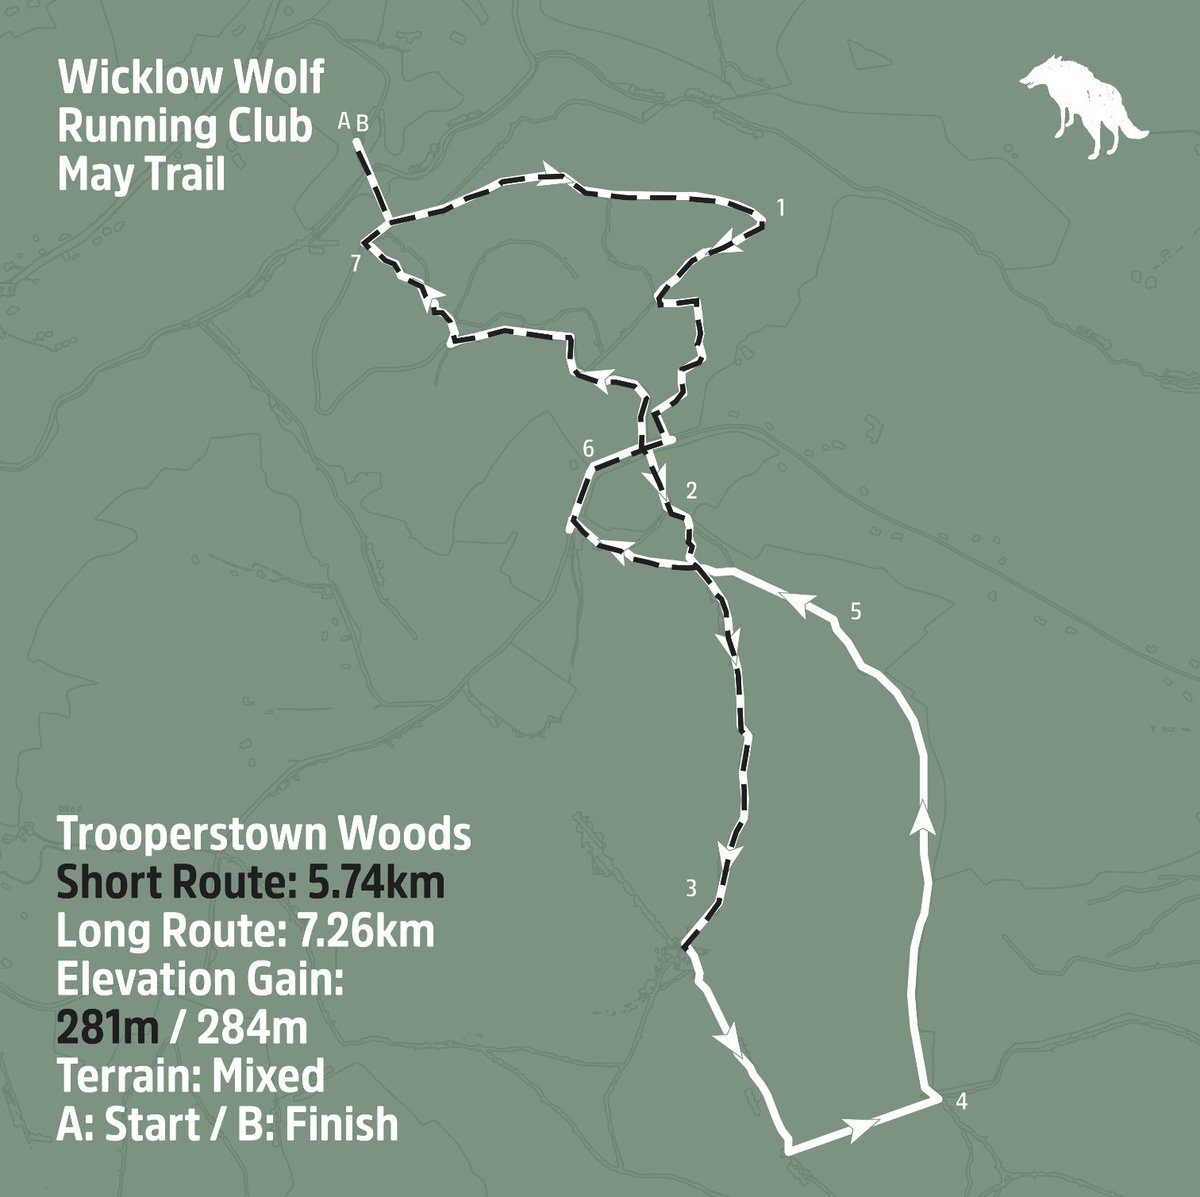 The Wicklow Wolf Running Club will be taking on the trails in Trooperstown Woods this Friday. Join us for a fun, social run followed by some well earned Wicklow Wolf beers! Find out more information here: wicklowwolf.com/running-club/

#IndependentByNature